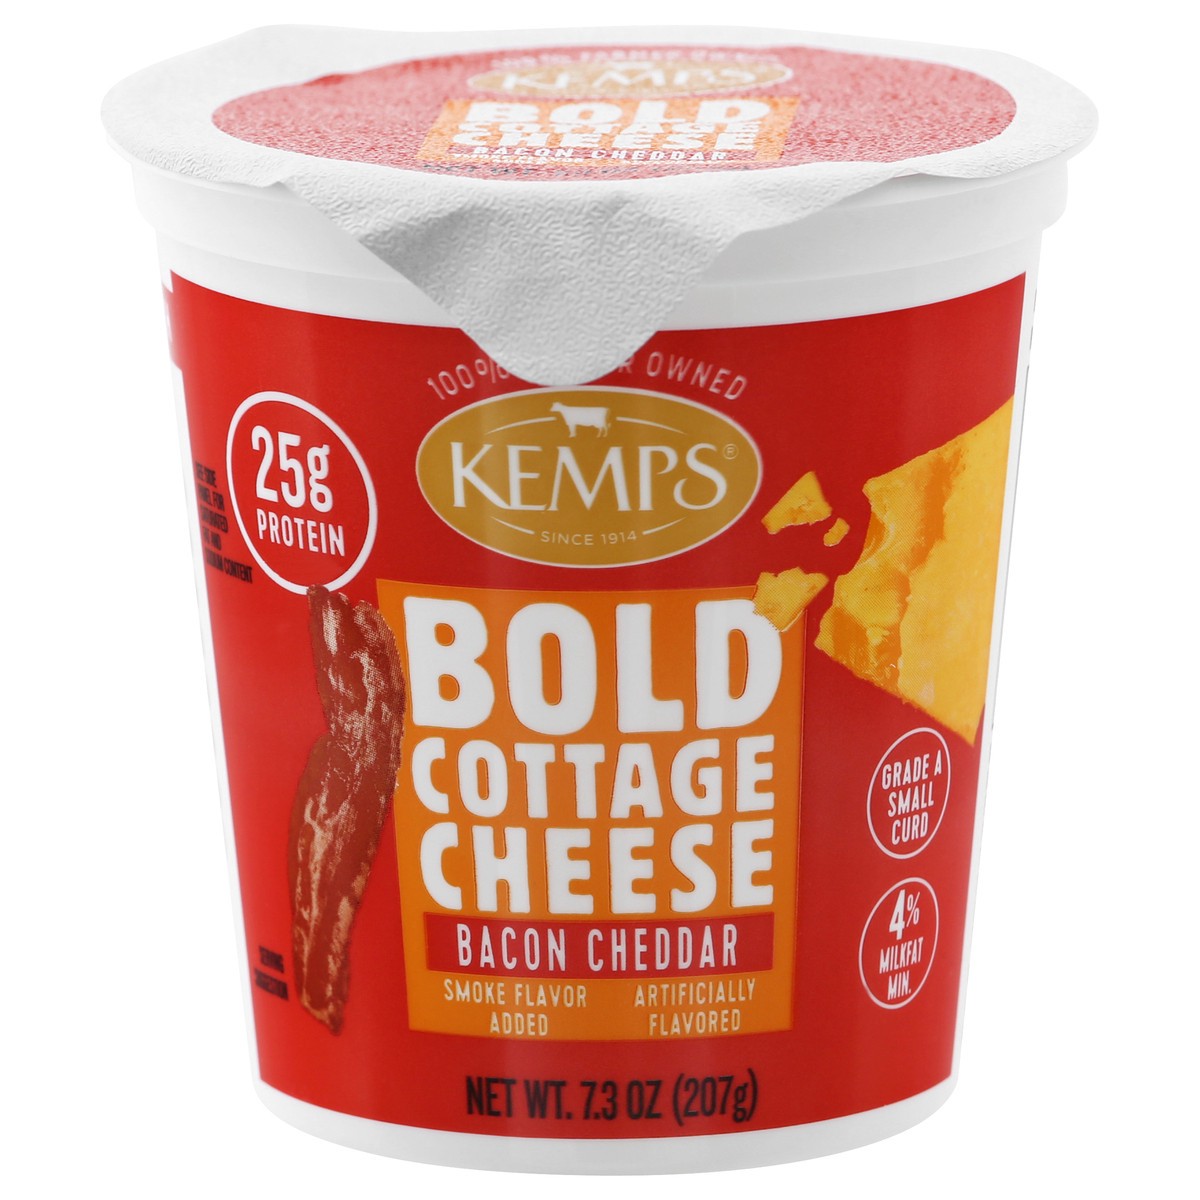 slide 1 of 13, Kemps Small Curd 4% Milkfat Min Bold Bacon Cheddar Cottage Cheese 7.3 oz, 7.3 oz